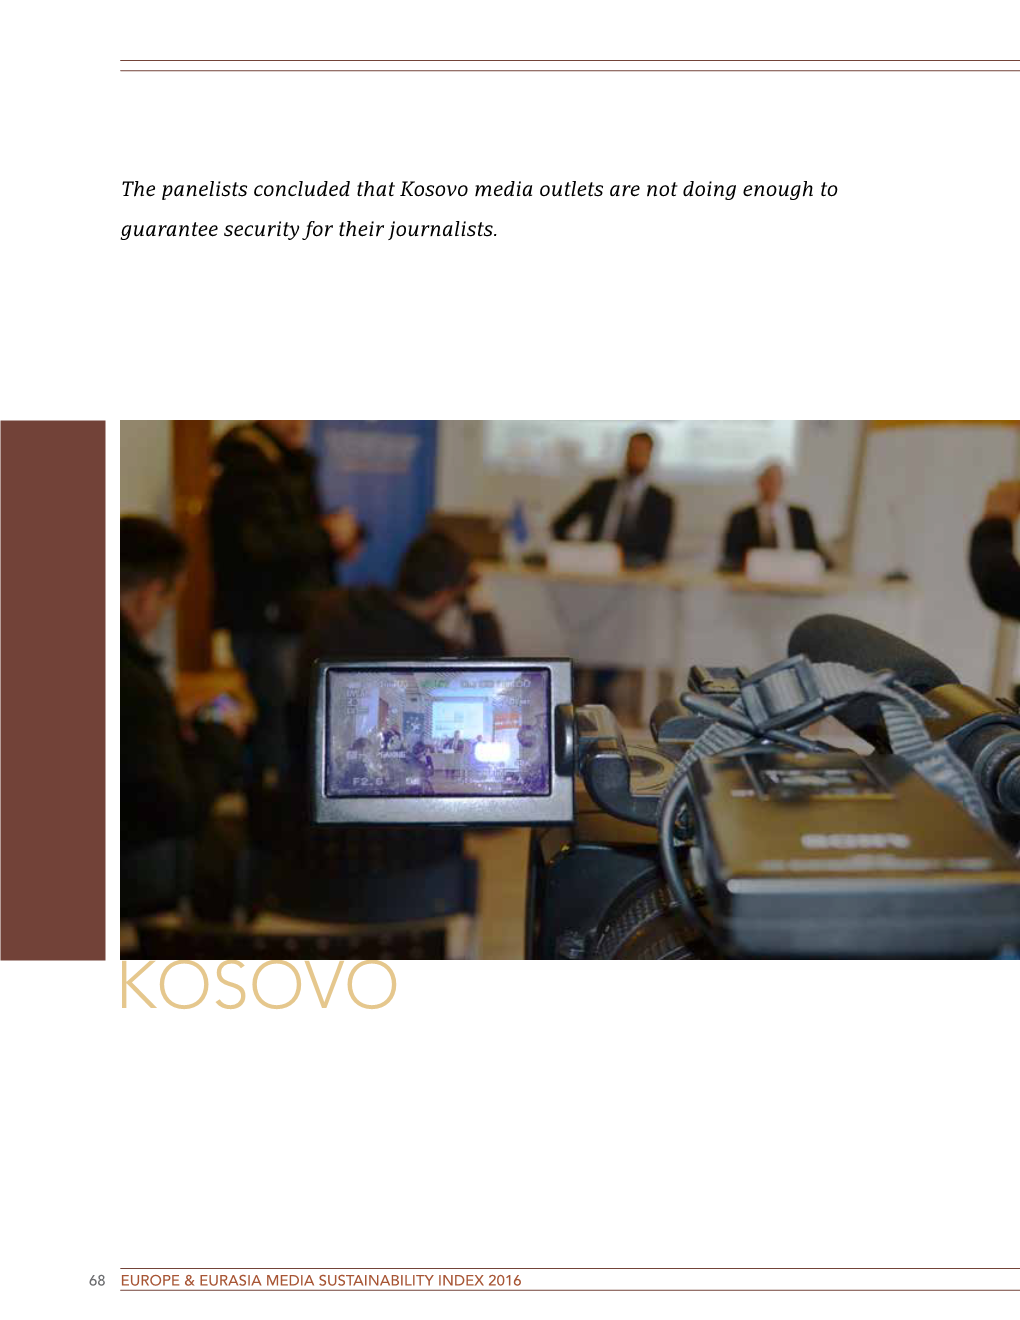 Kosovo Media Outlets Are Not Doing Enough to Guarantee Security for Their Journalists